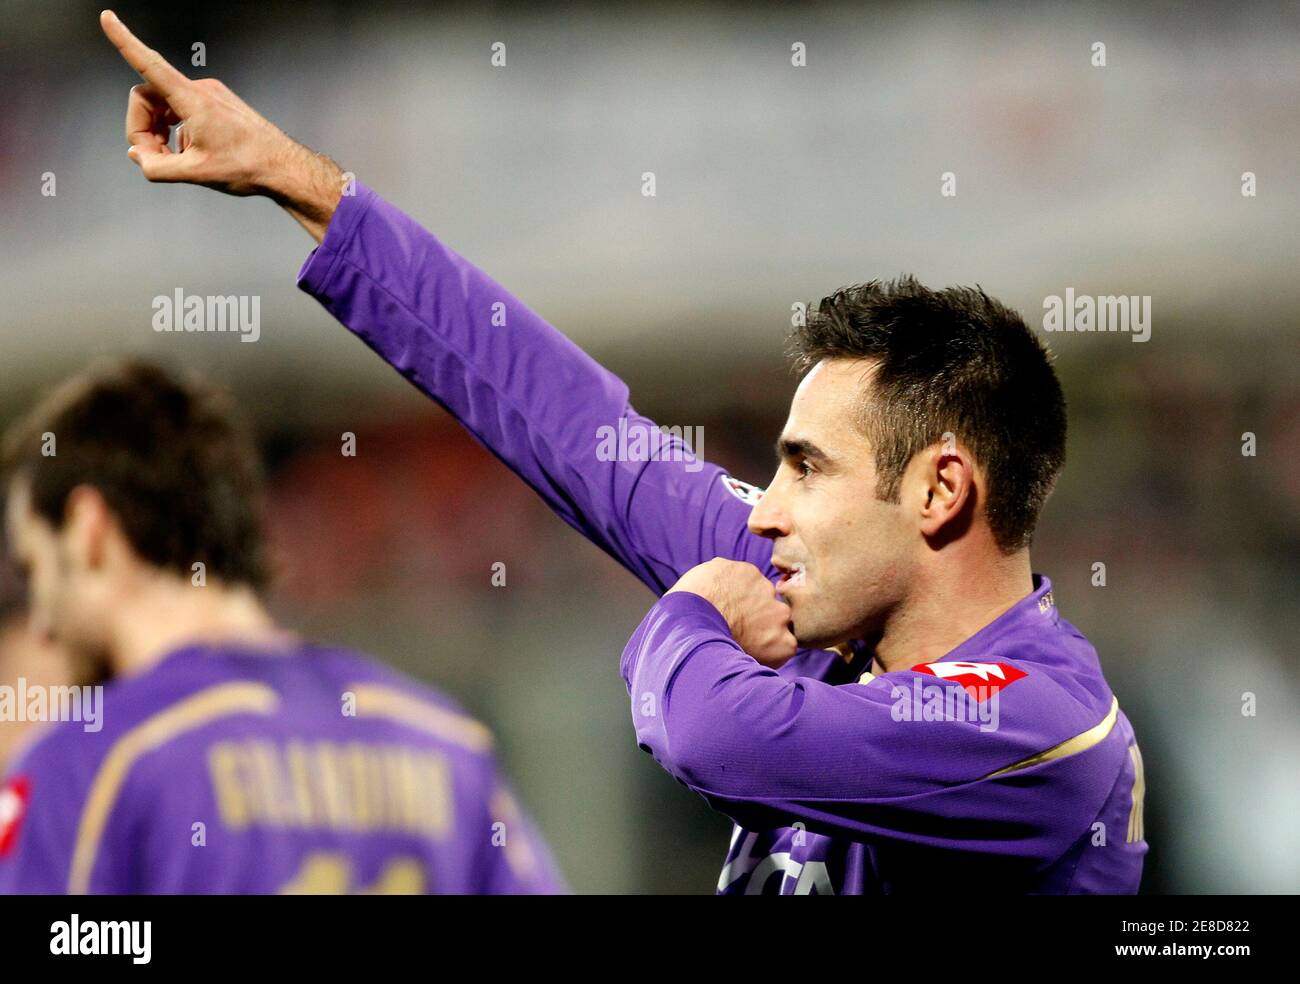 Fiorentina's Marco Marchionni celebrates after scoring against Juventus during their Italian Serie A soccer match at the Artemio Franchi stadium in Florence March 6, 2010.     REUTERS/Giampiero Sposito (ITALY - Tags: SPORT SOCCER) Stock Photo